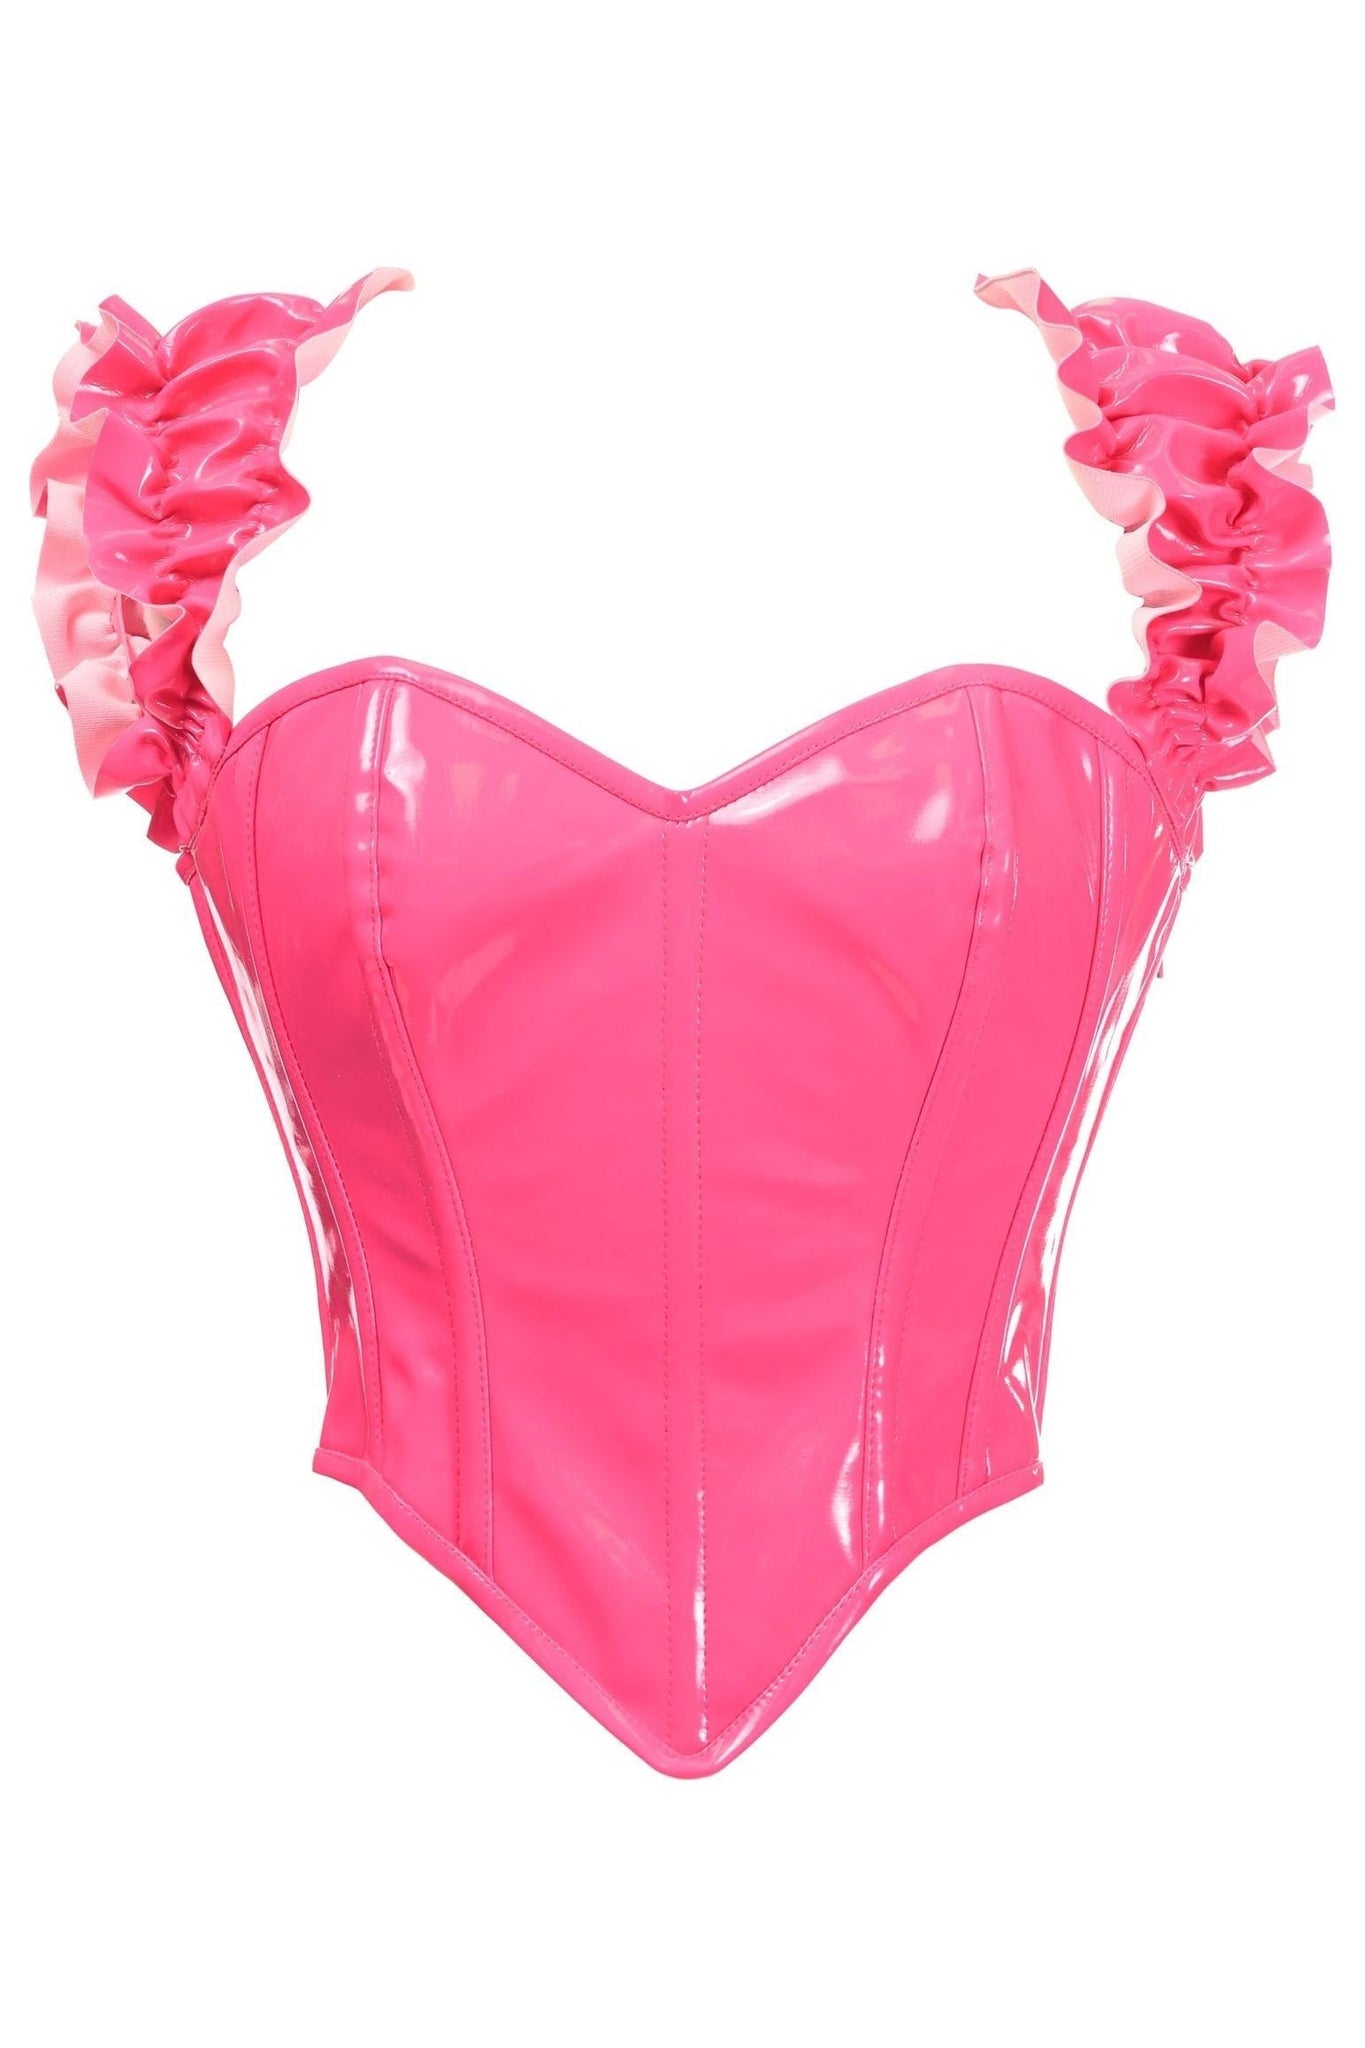 Daisy Corsets Top Drawer Steel Boned Hot Pink Patent Ruffle Sleeve